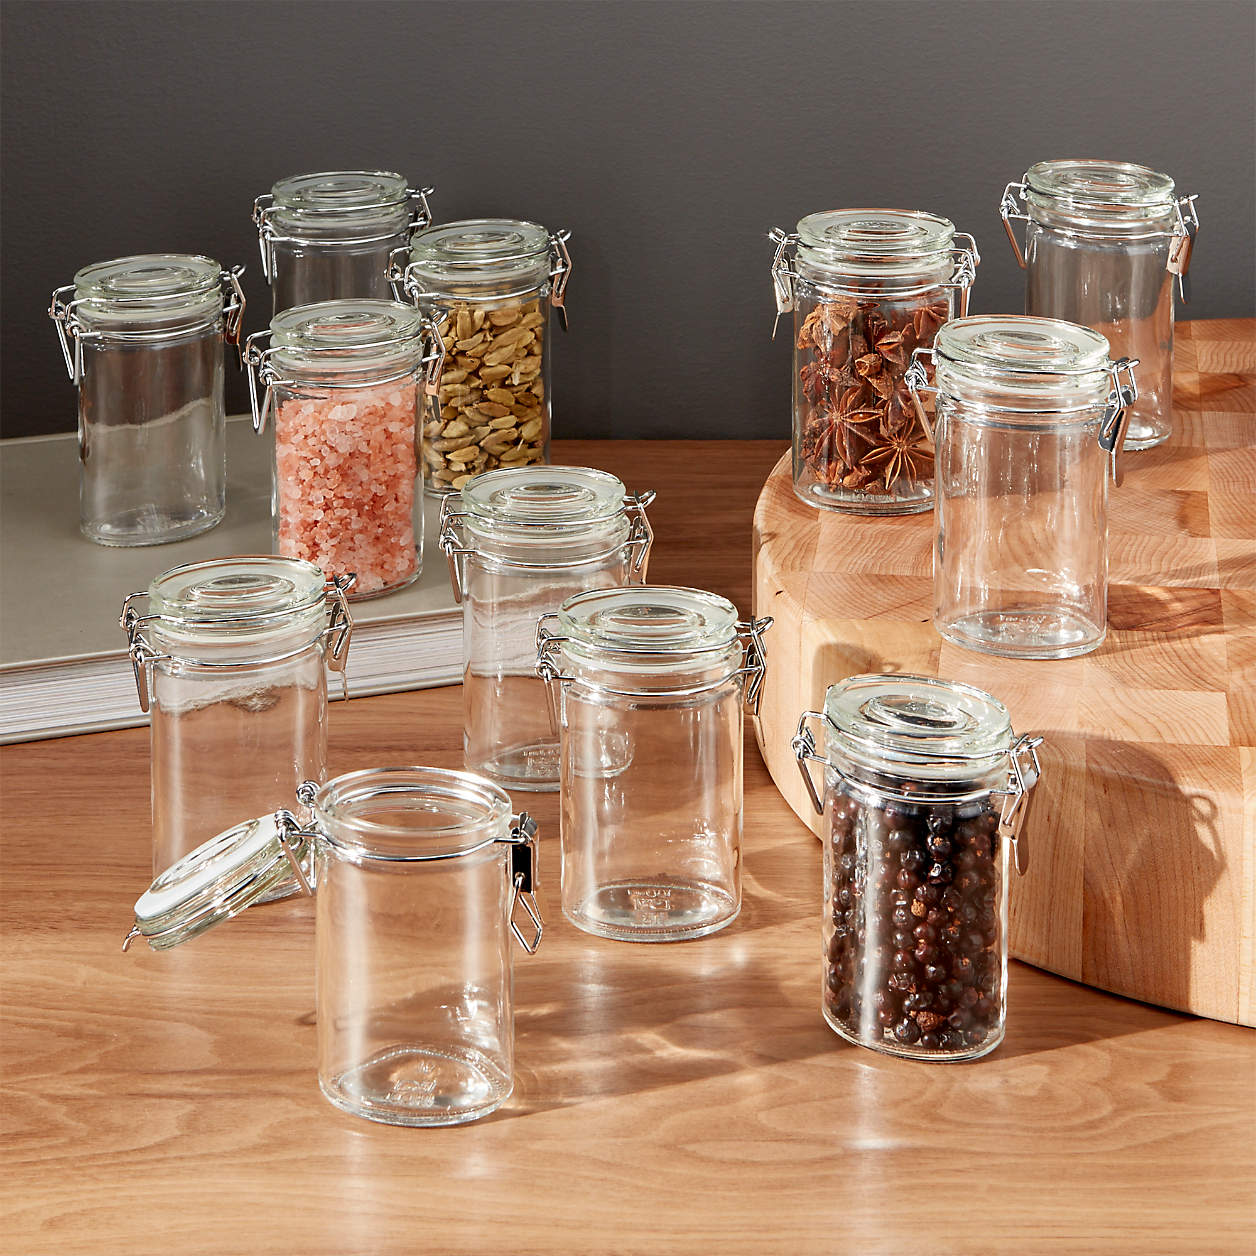 How to Organize Spices Using Glass Jars - Life Love Larson